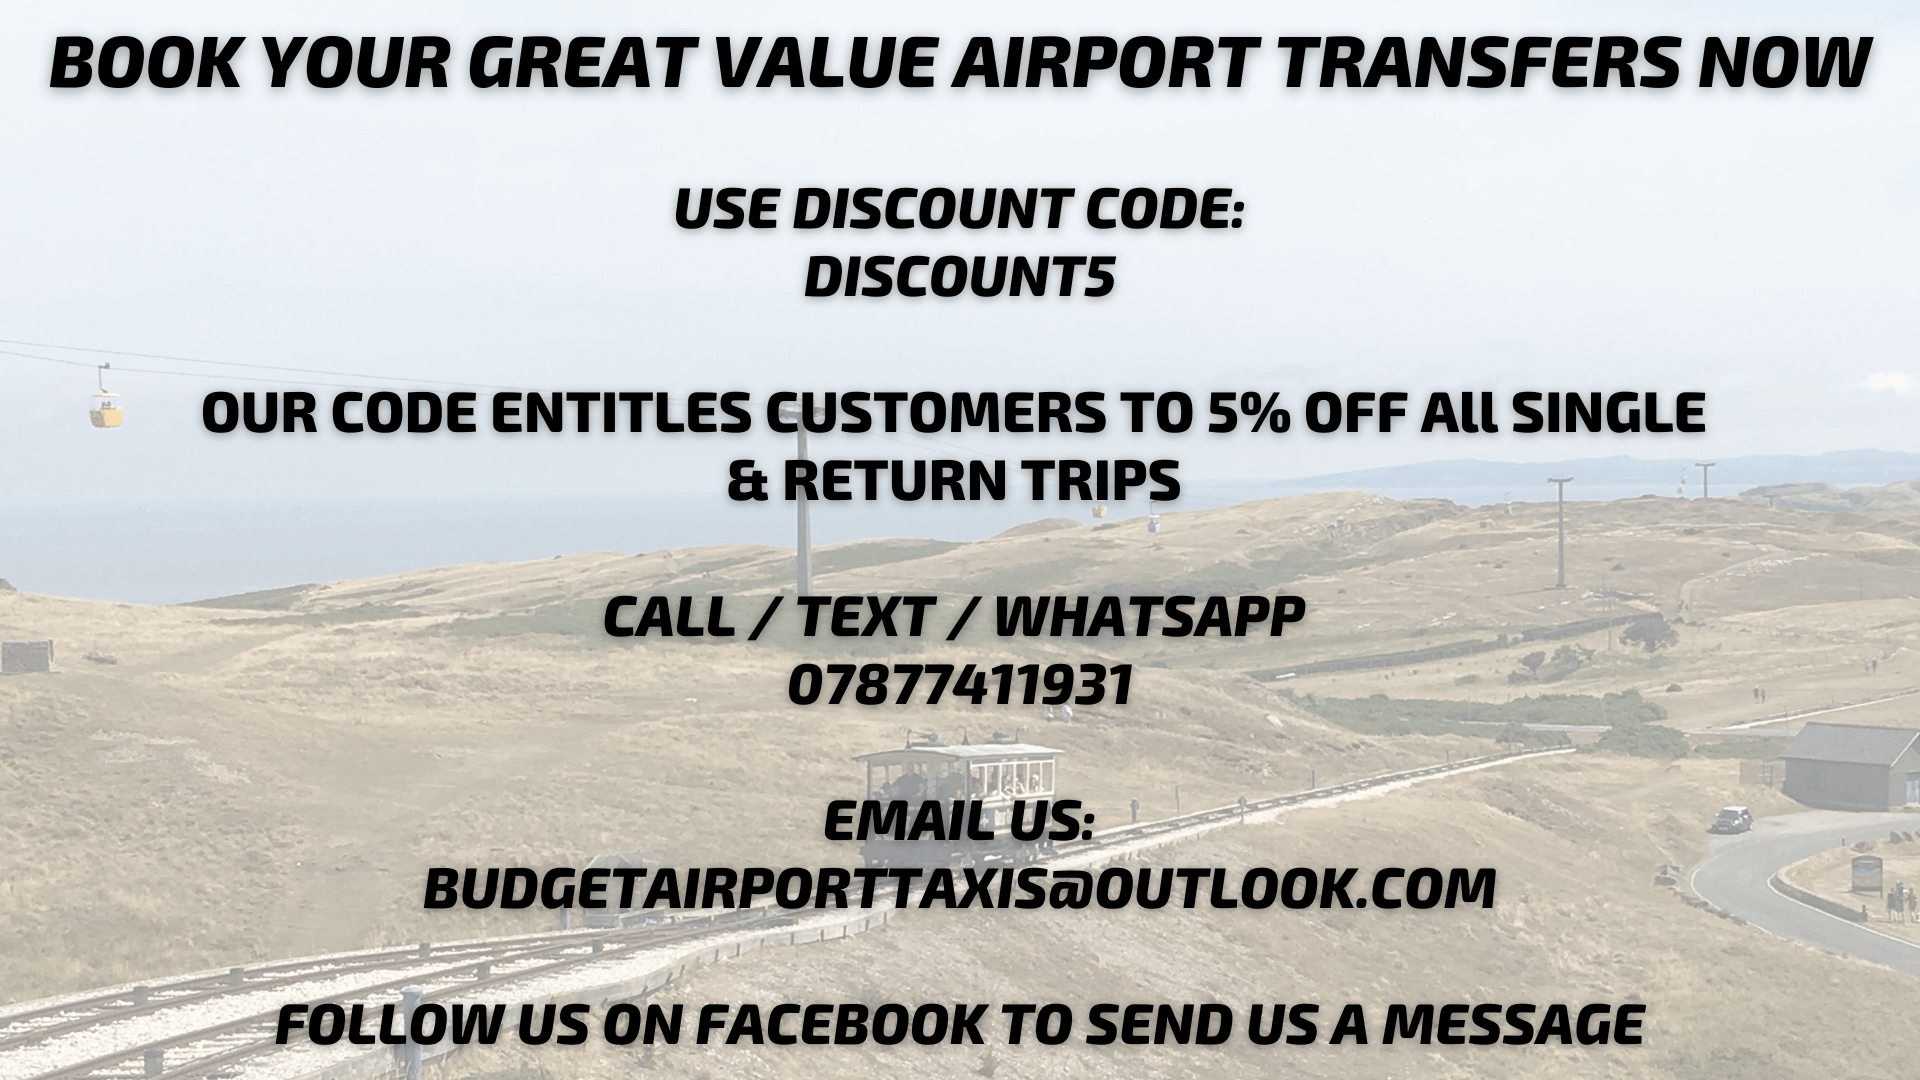 maybole airport taxi transfer 5% discount glasgow airport